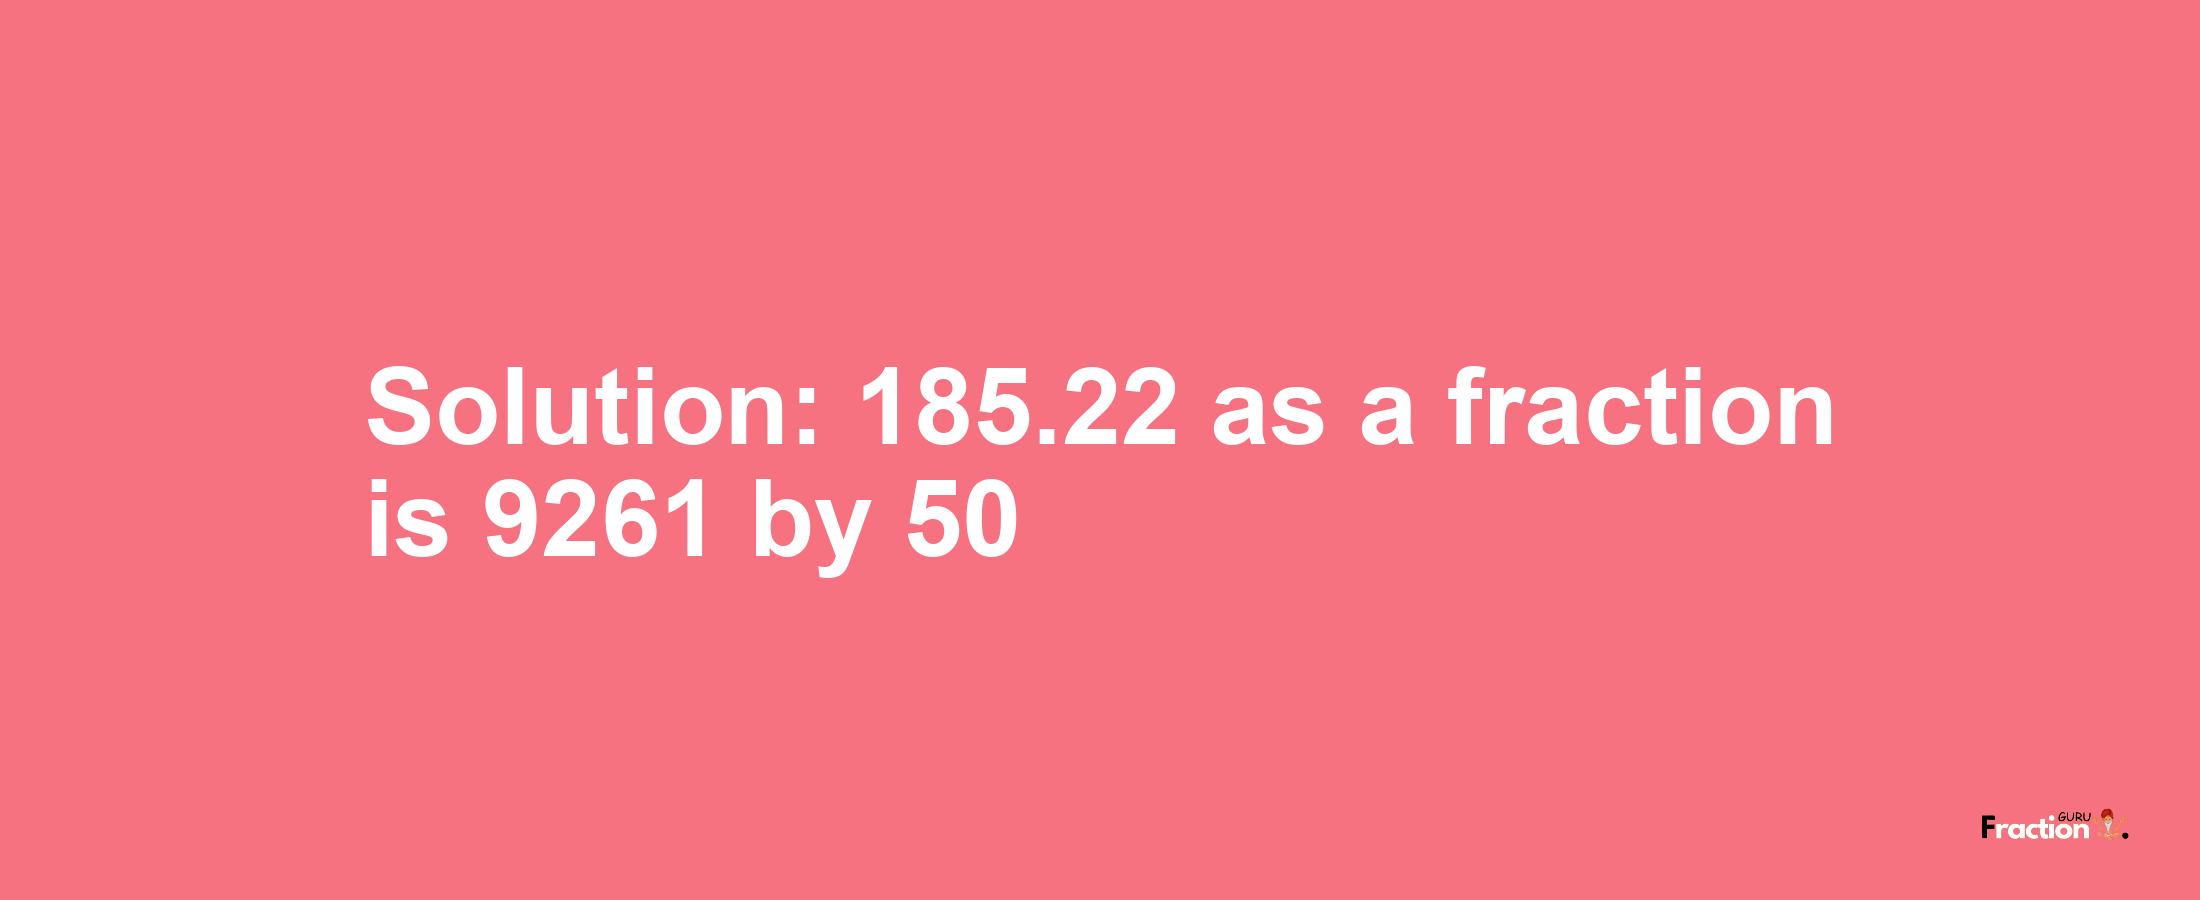 Solution:185.22 as a fraction is 9261/50